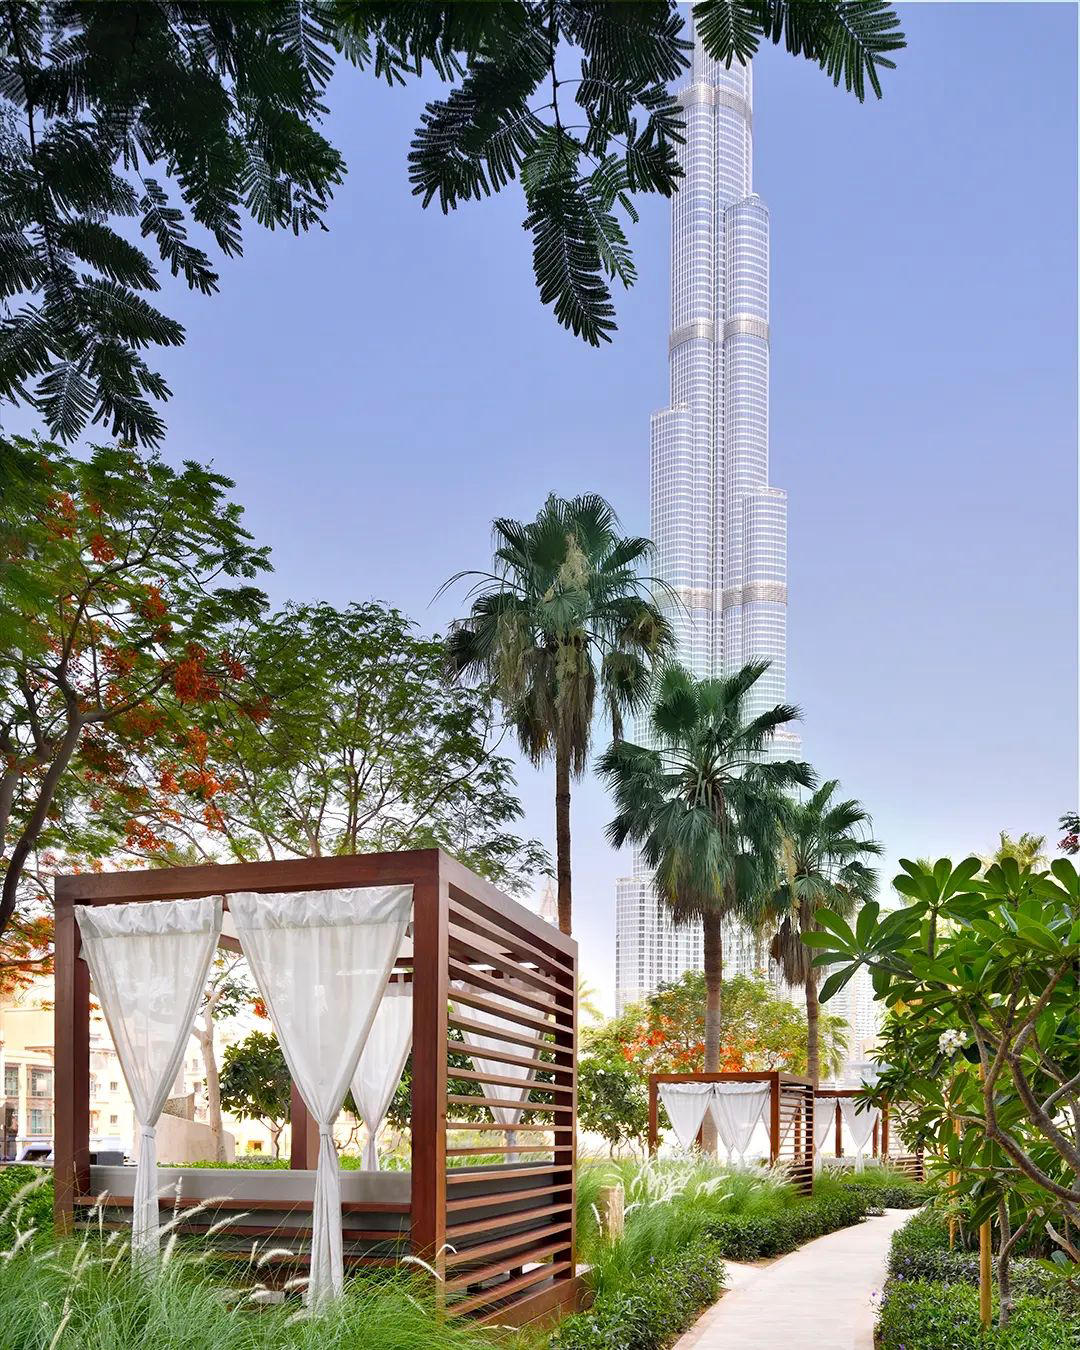 Immerse yourself in the cool comfort of our pool and take in majestic views of the Burj Khalifa